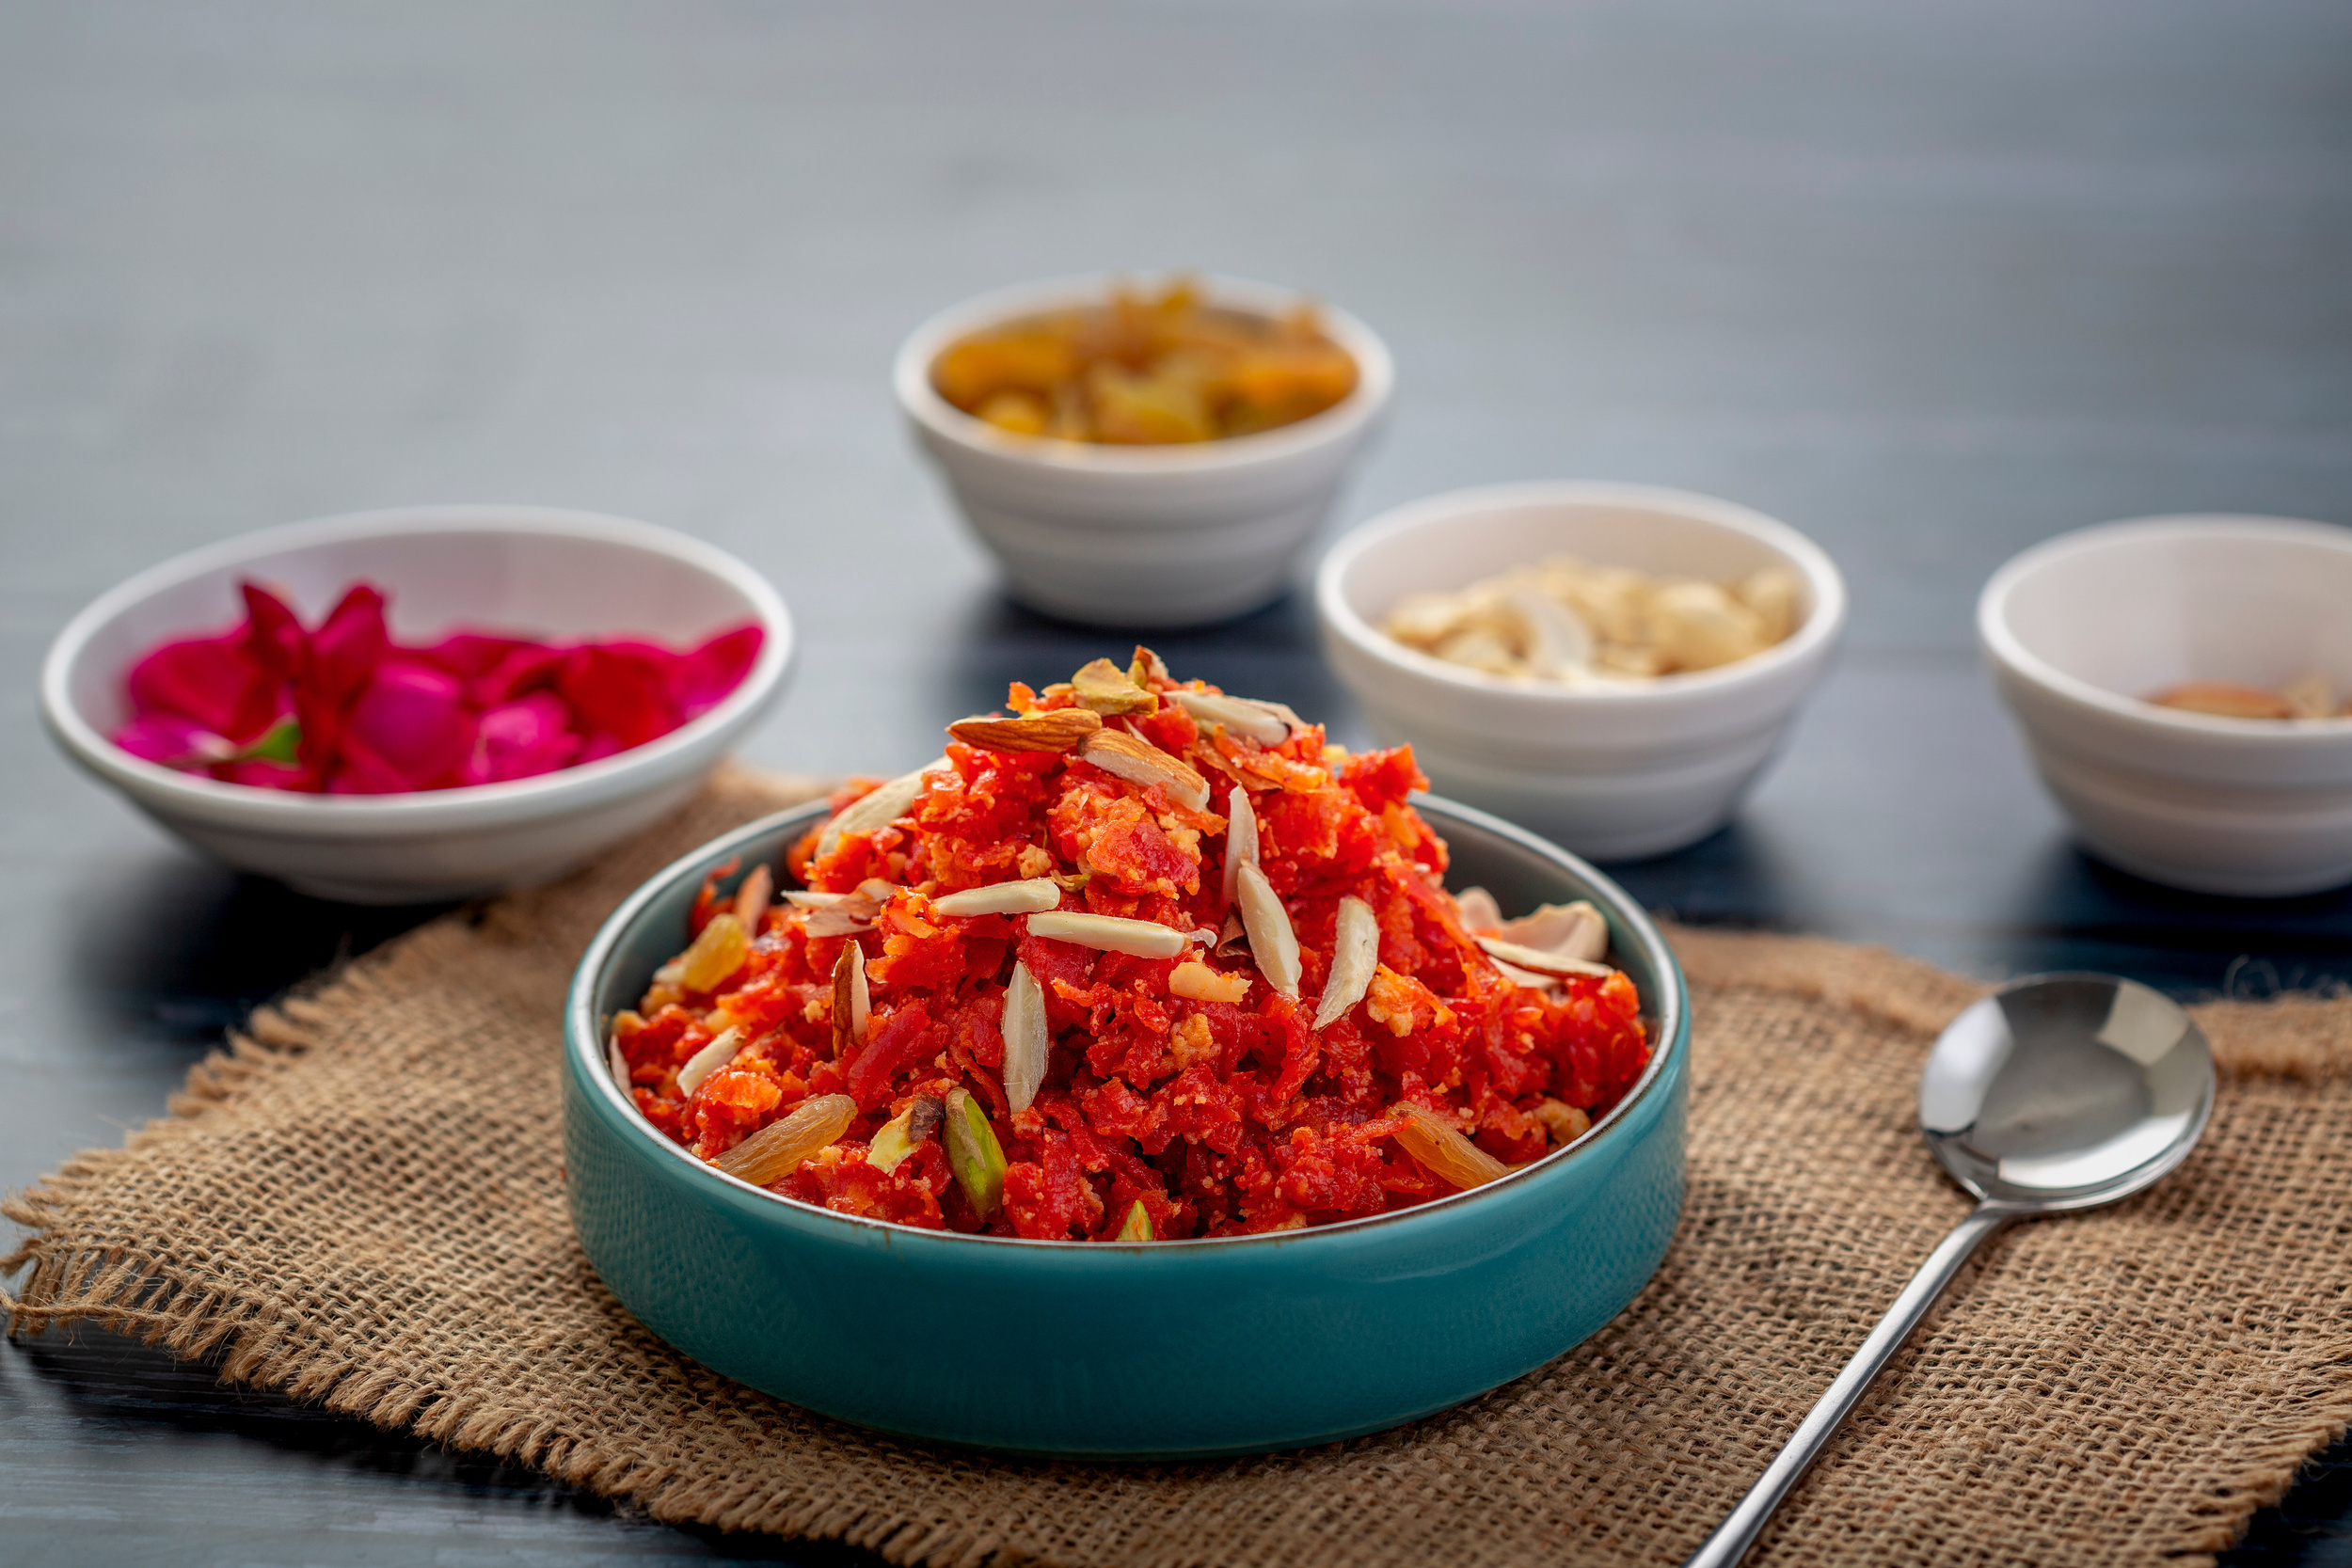 <p><em>Gajar ka halwa</em> is a mouthful to say, but it’s also a mouthful of deliciousness. This traditional North Indian dessert is made by simmering grated carrots with water, milk, ghee, sugar, and cardamom, and topping the finished product with nuts and sometimes raisins. <a href="https://www.indianhealthyrecipes.com/carrot-halwa-recipe-gajar-ka-halwa-recipe/"><span>This page from Swasthi’s Recipes</span></a> gives you four different ways to prep this dessert so you can choose whichever works best for you!</p><p>You may also like: <a href='https://www.yardbarker.com/lifestyle/articles/the_14_most_beautiful_canadian_parks_to_visit/s1__38393750'>The 14 most beautiful Canadian parks to visit</a></p>